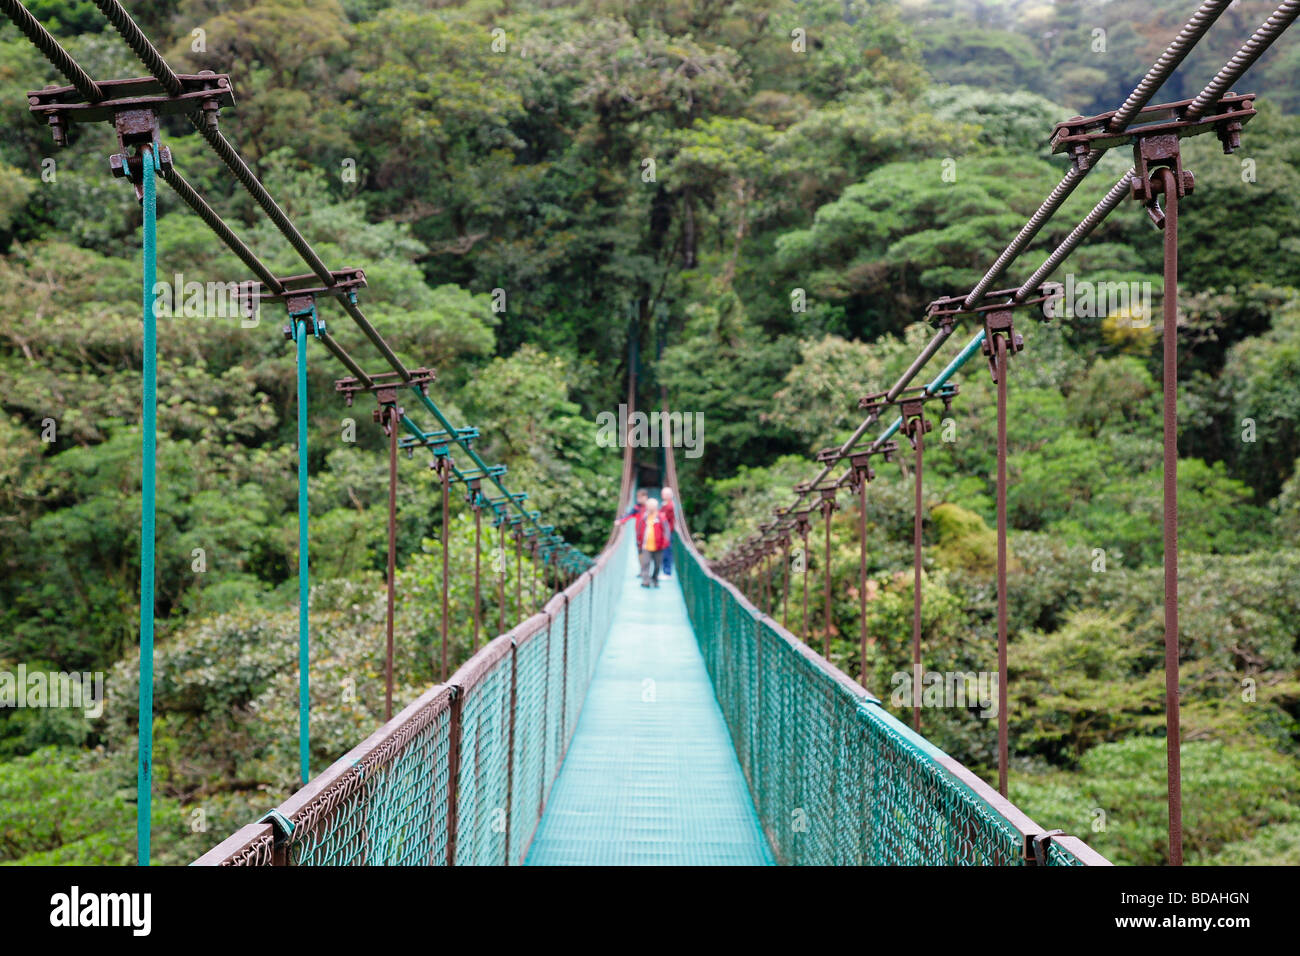 costa rica monteverde cloud forest national park tropical rain forest hikers along elevated sky walk central latin america Stock Photo